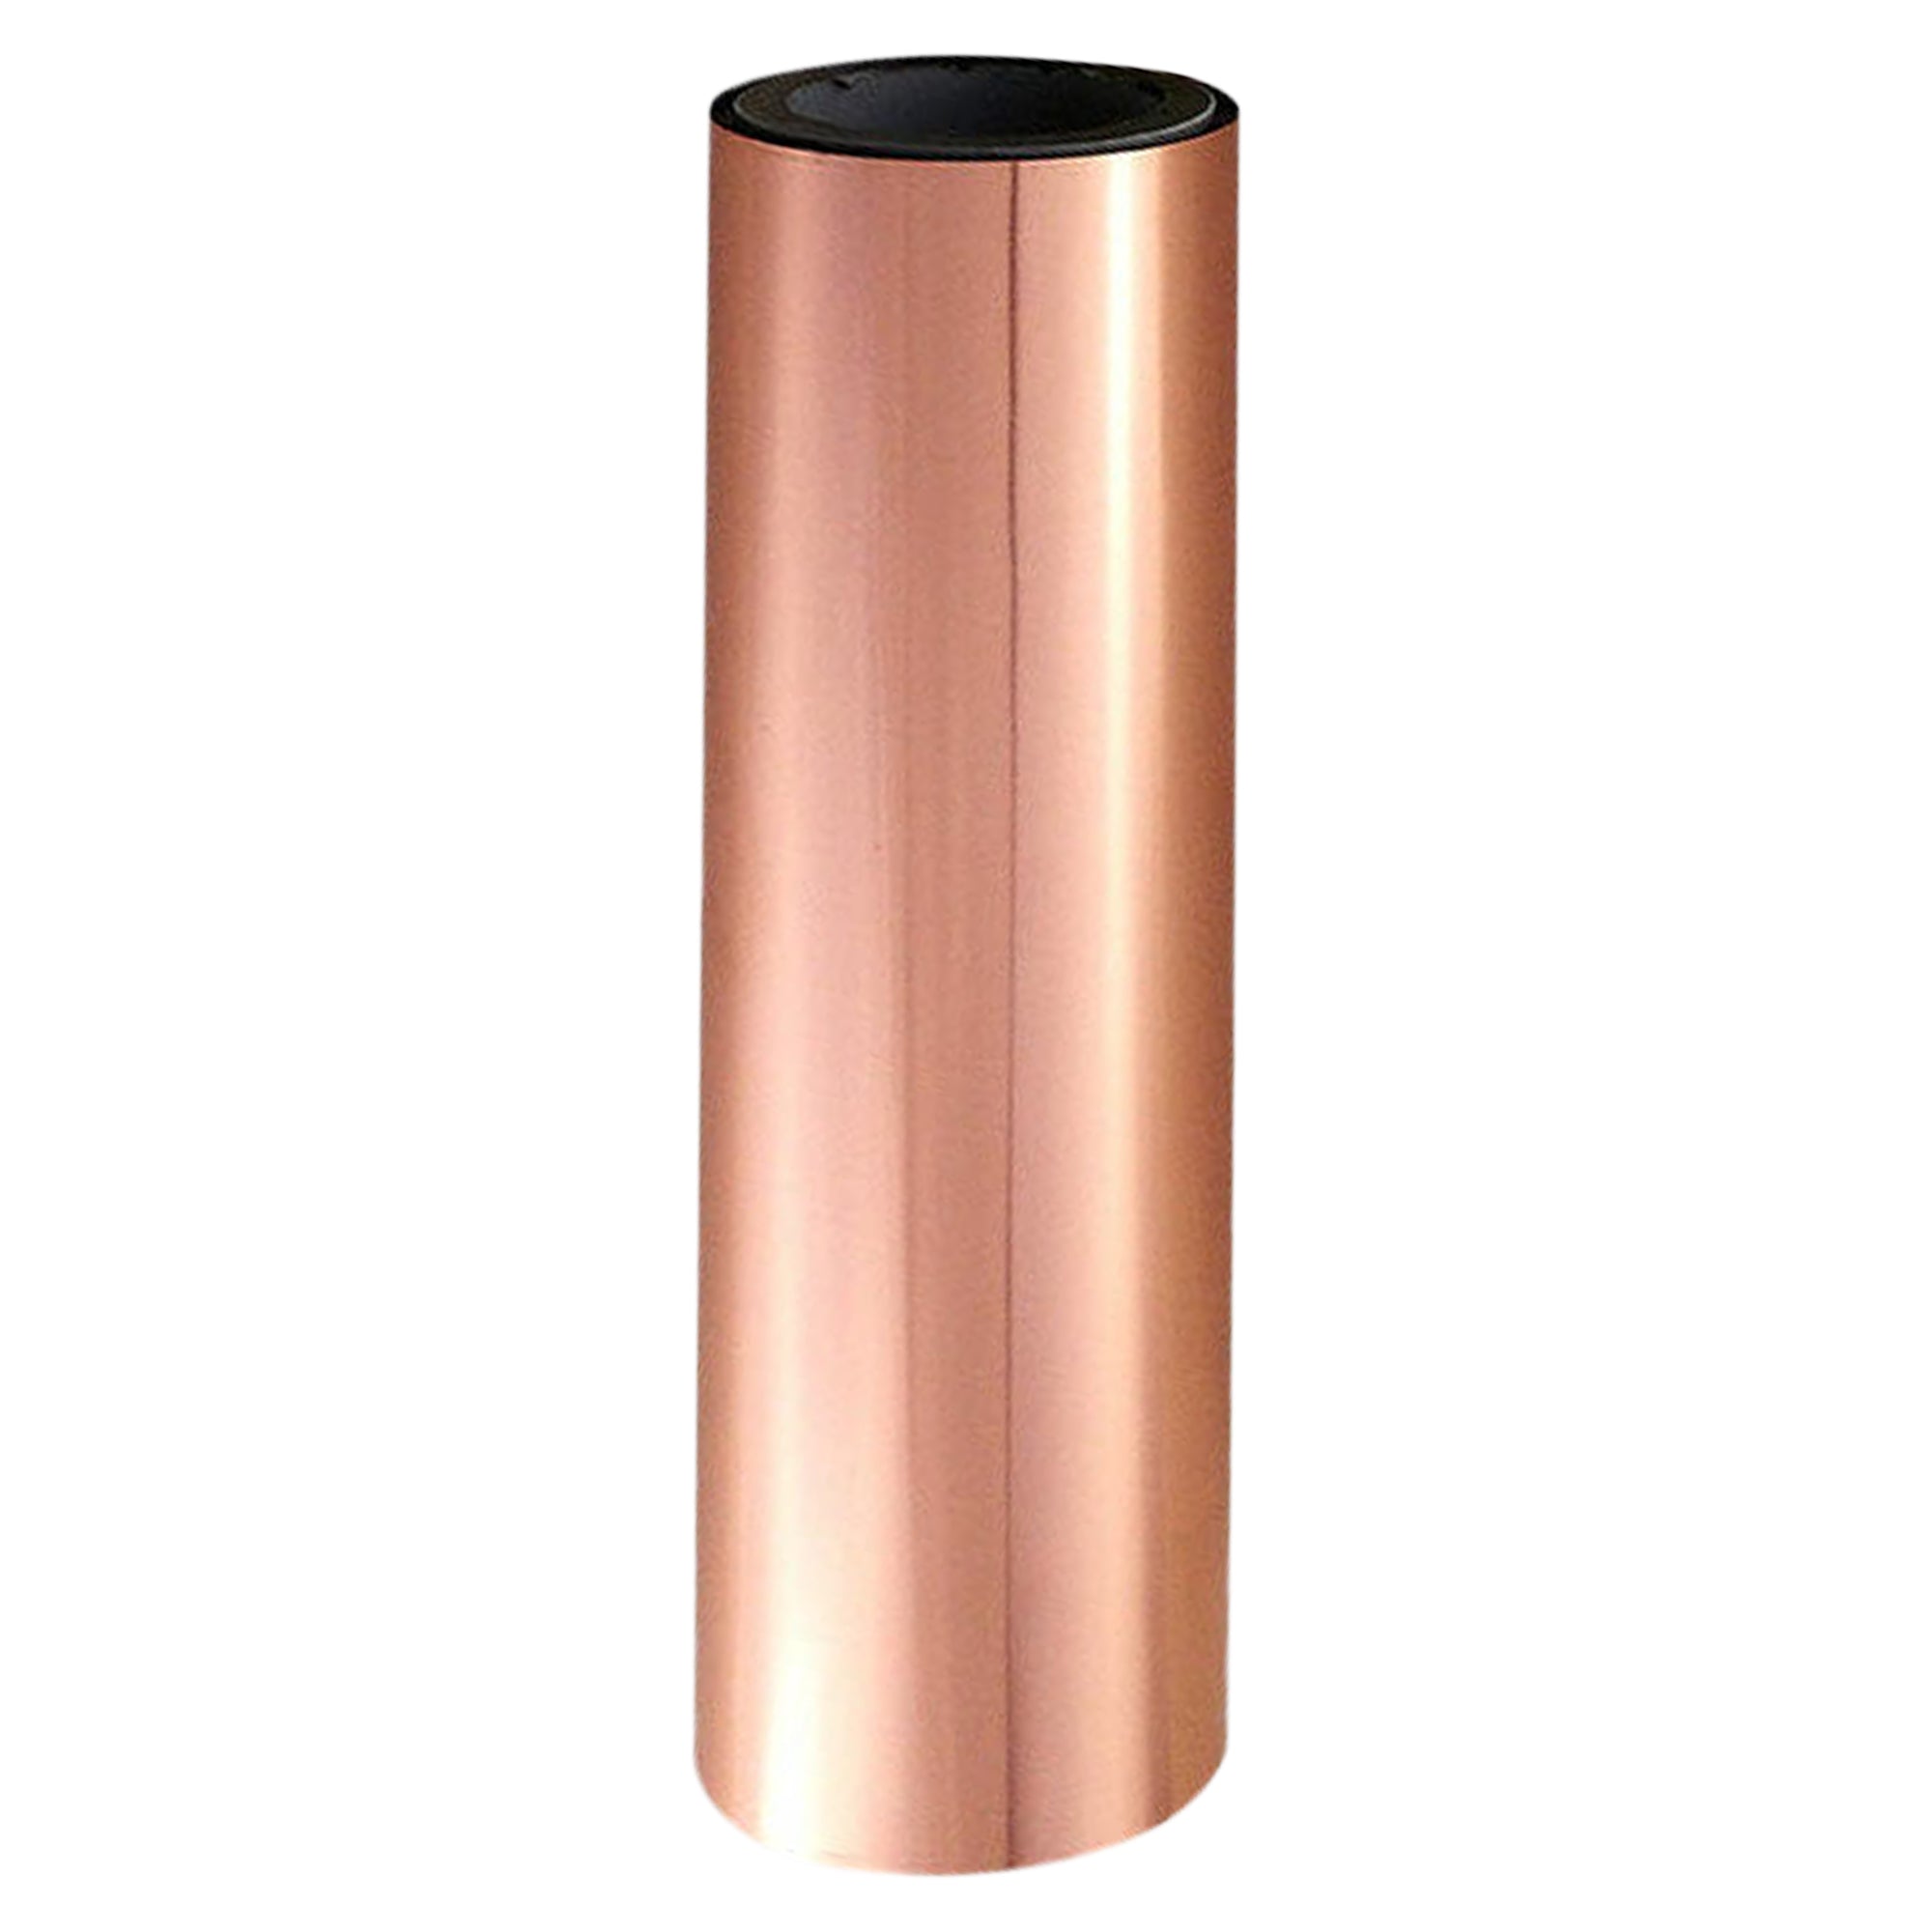 A single roll of elegant rose gold toner foil, with a warm, reflective sheen.